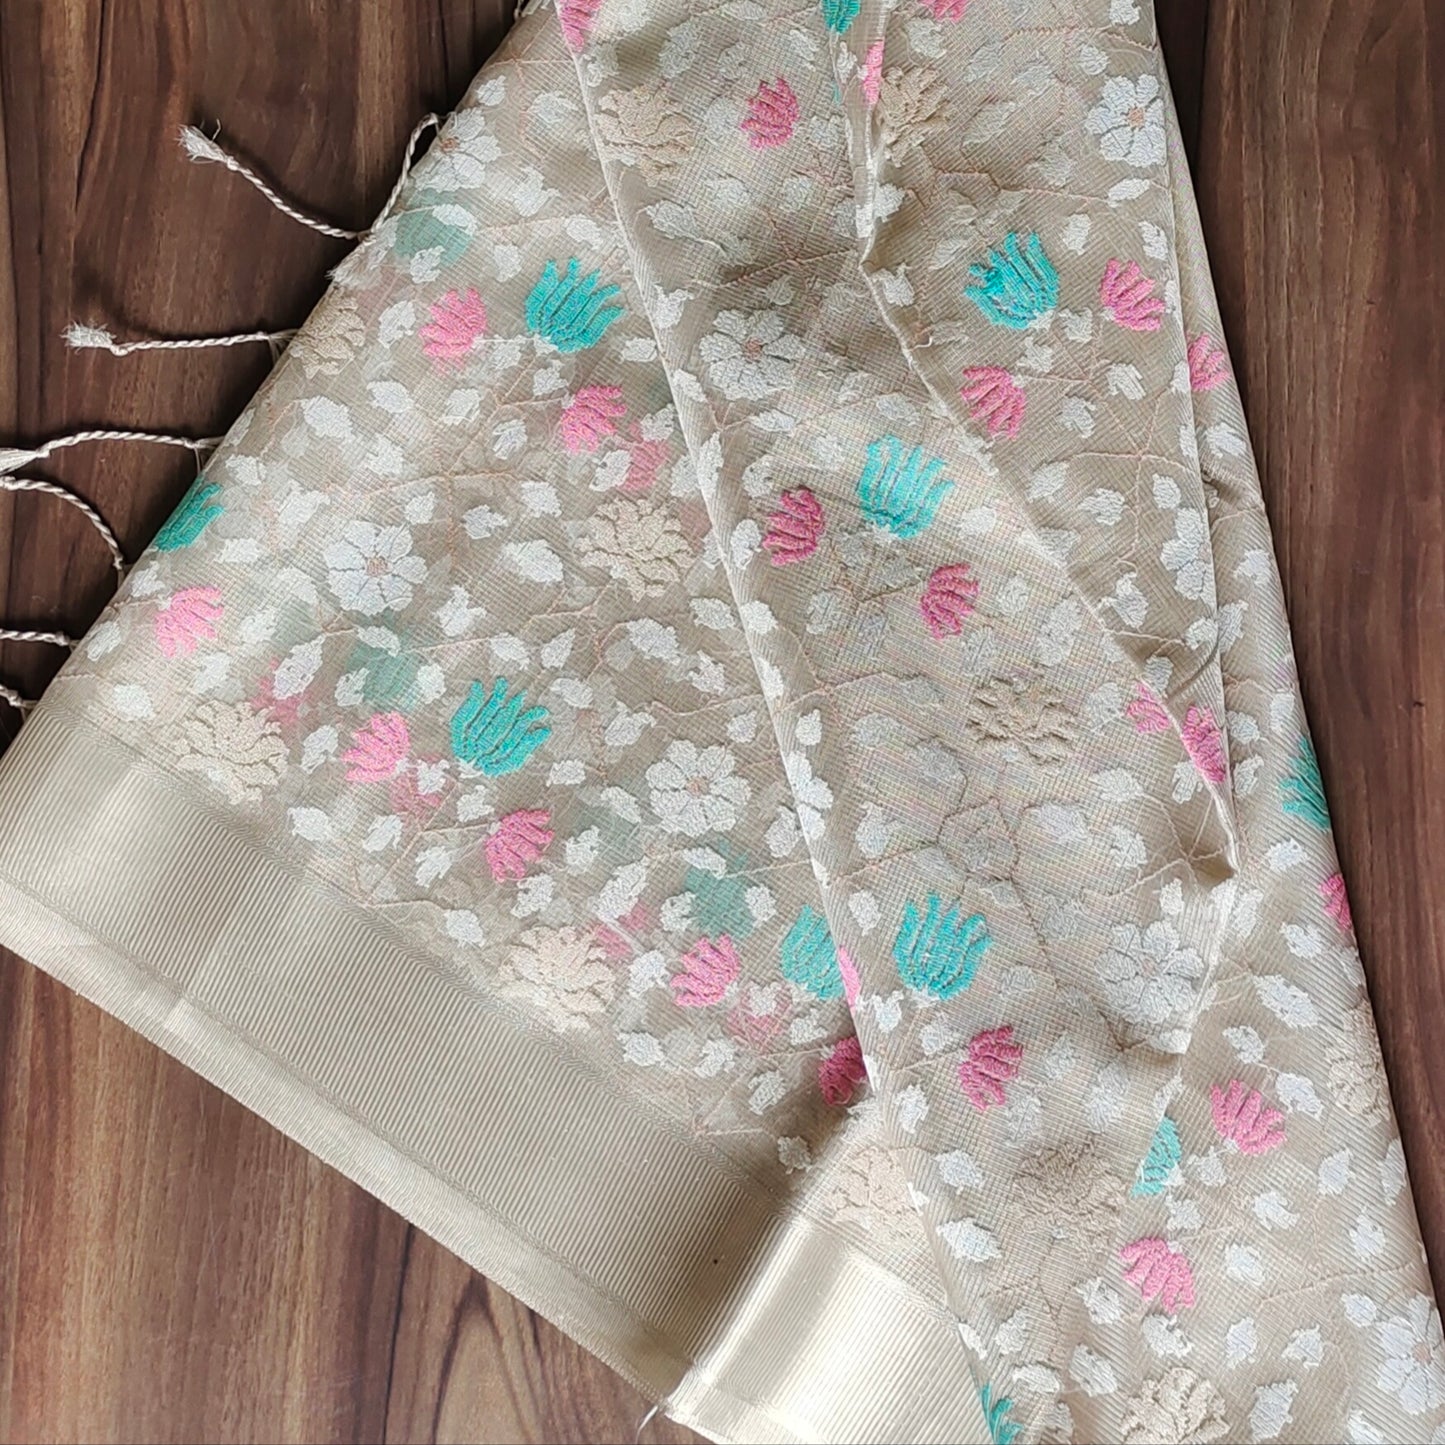 Shimmering Gold : Kota Tissue Floral Embroidery Work Saree